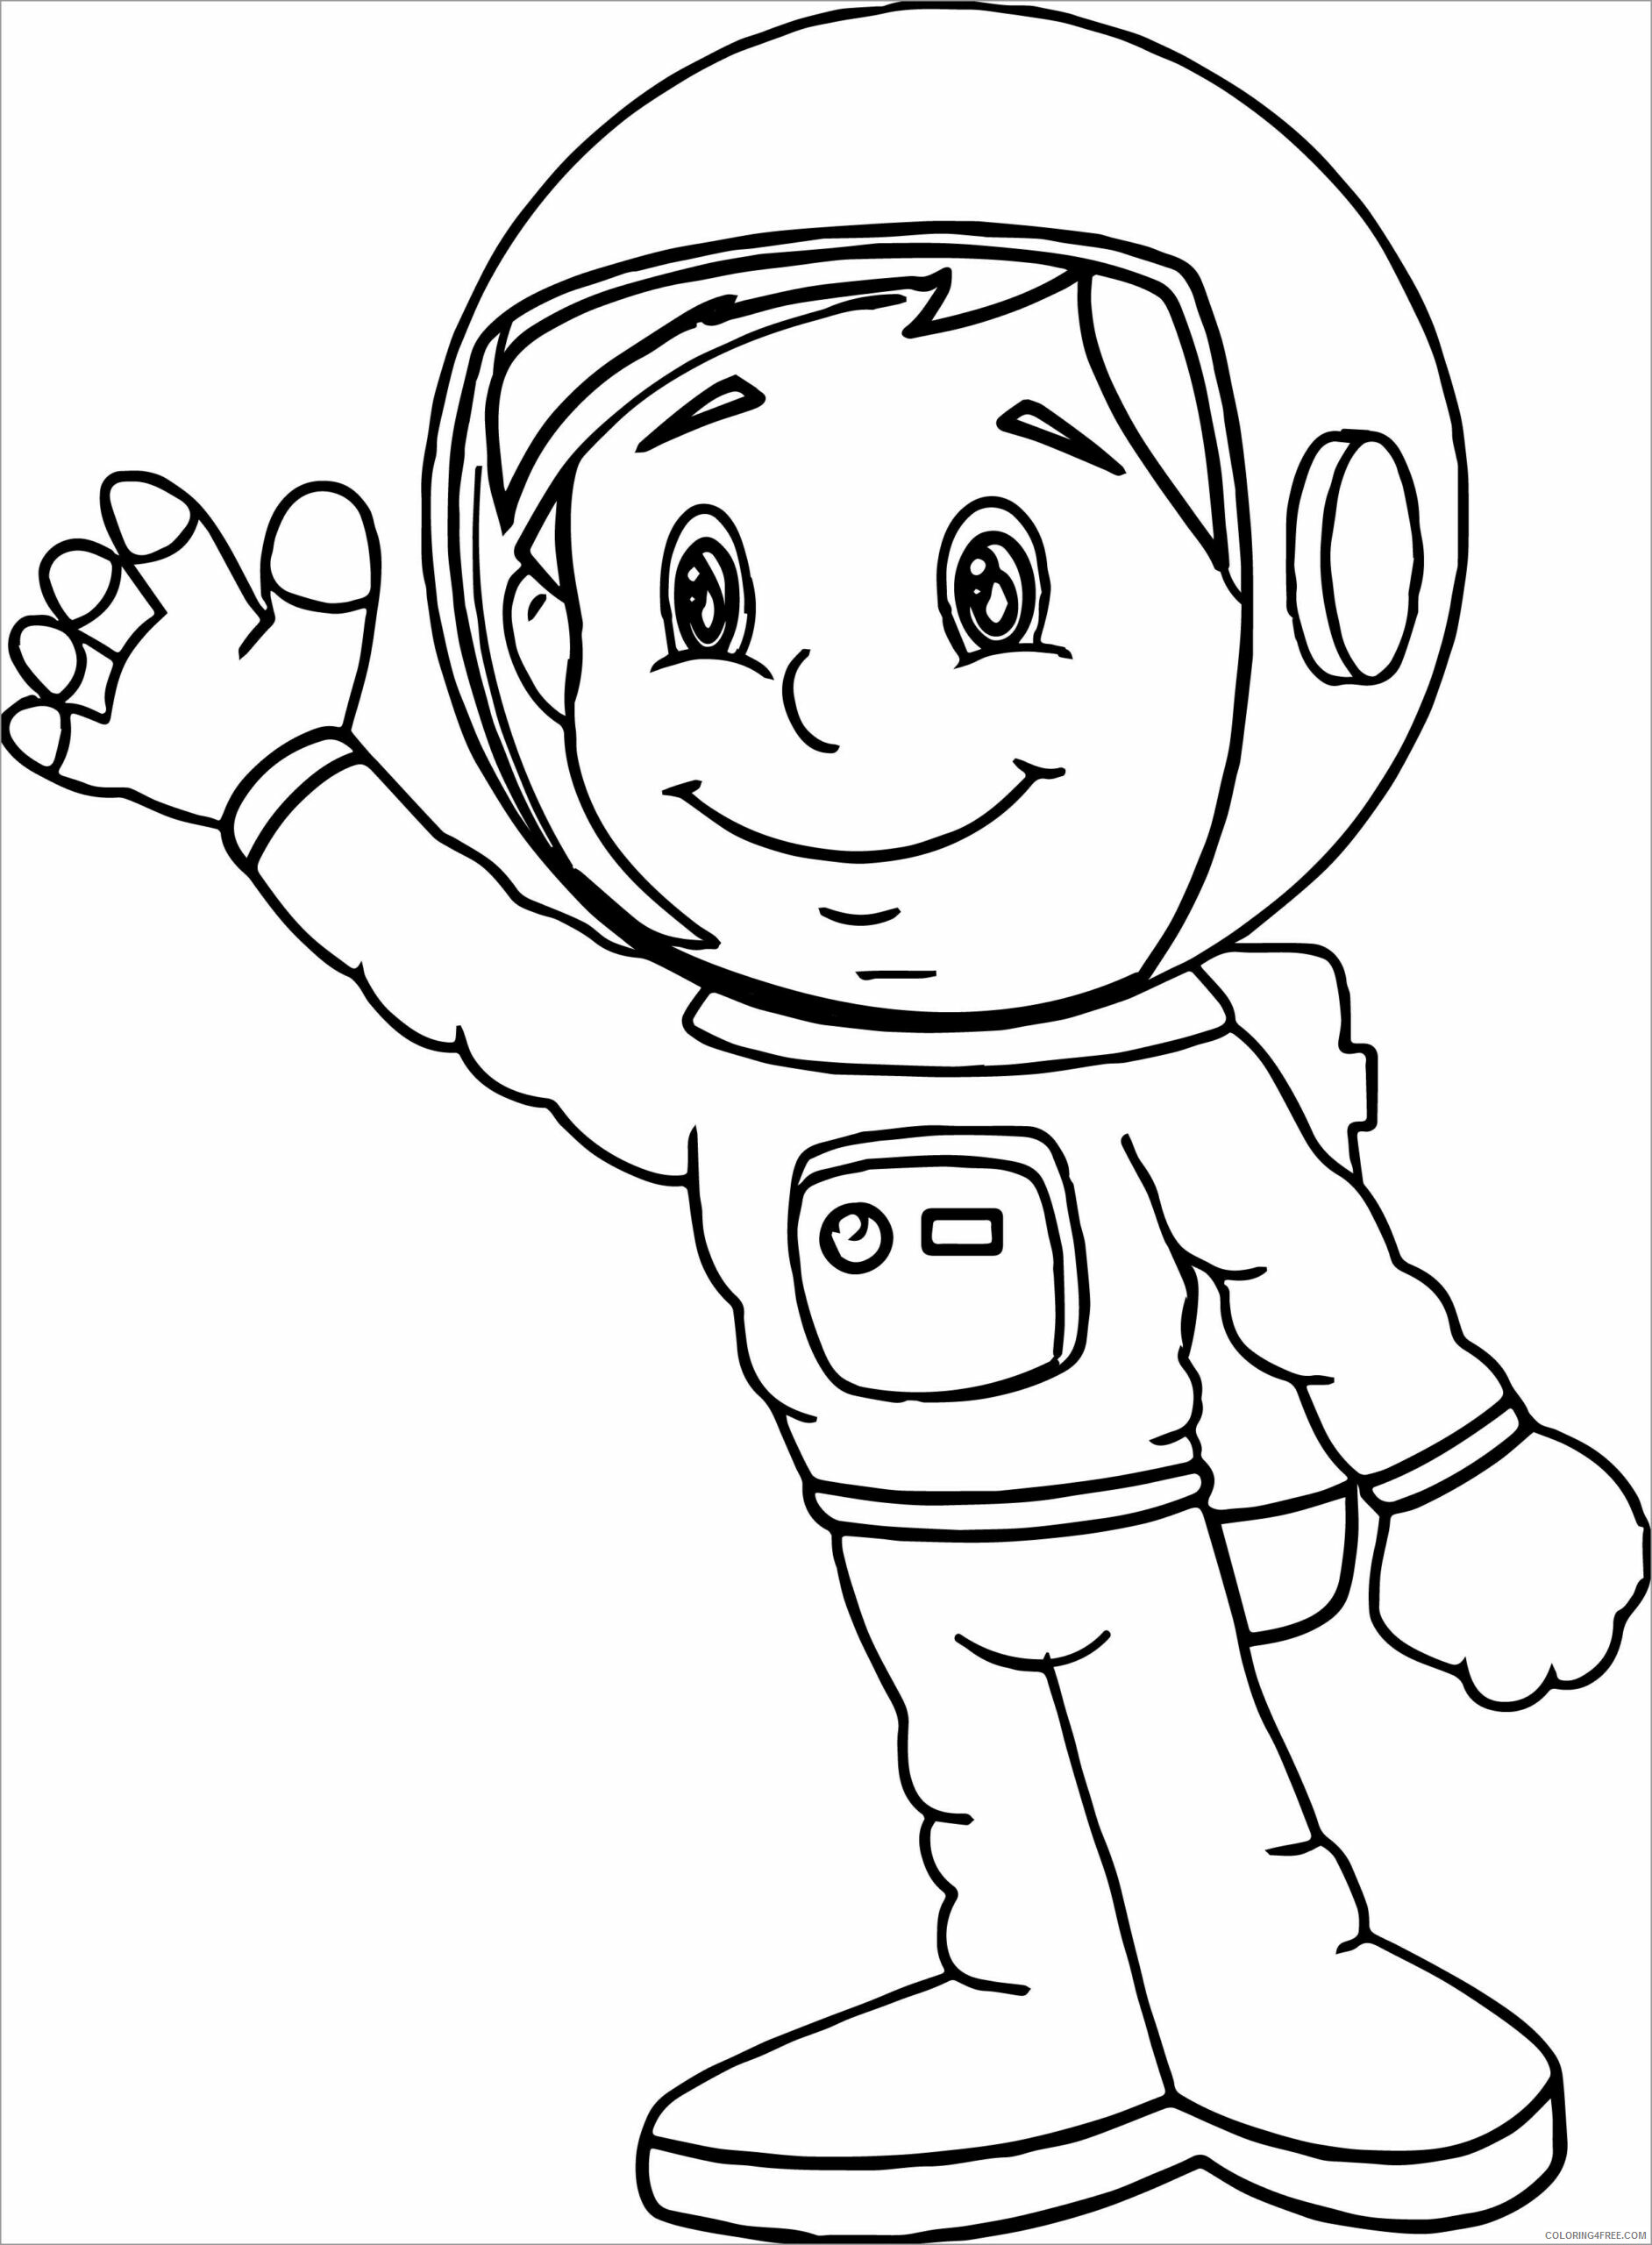 Astronaut Coloring Pages astronaut for kids 2 Printable 2021 0370 Coloring4free